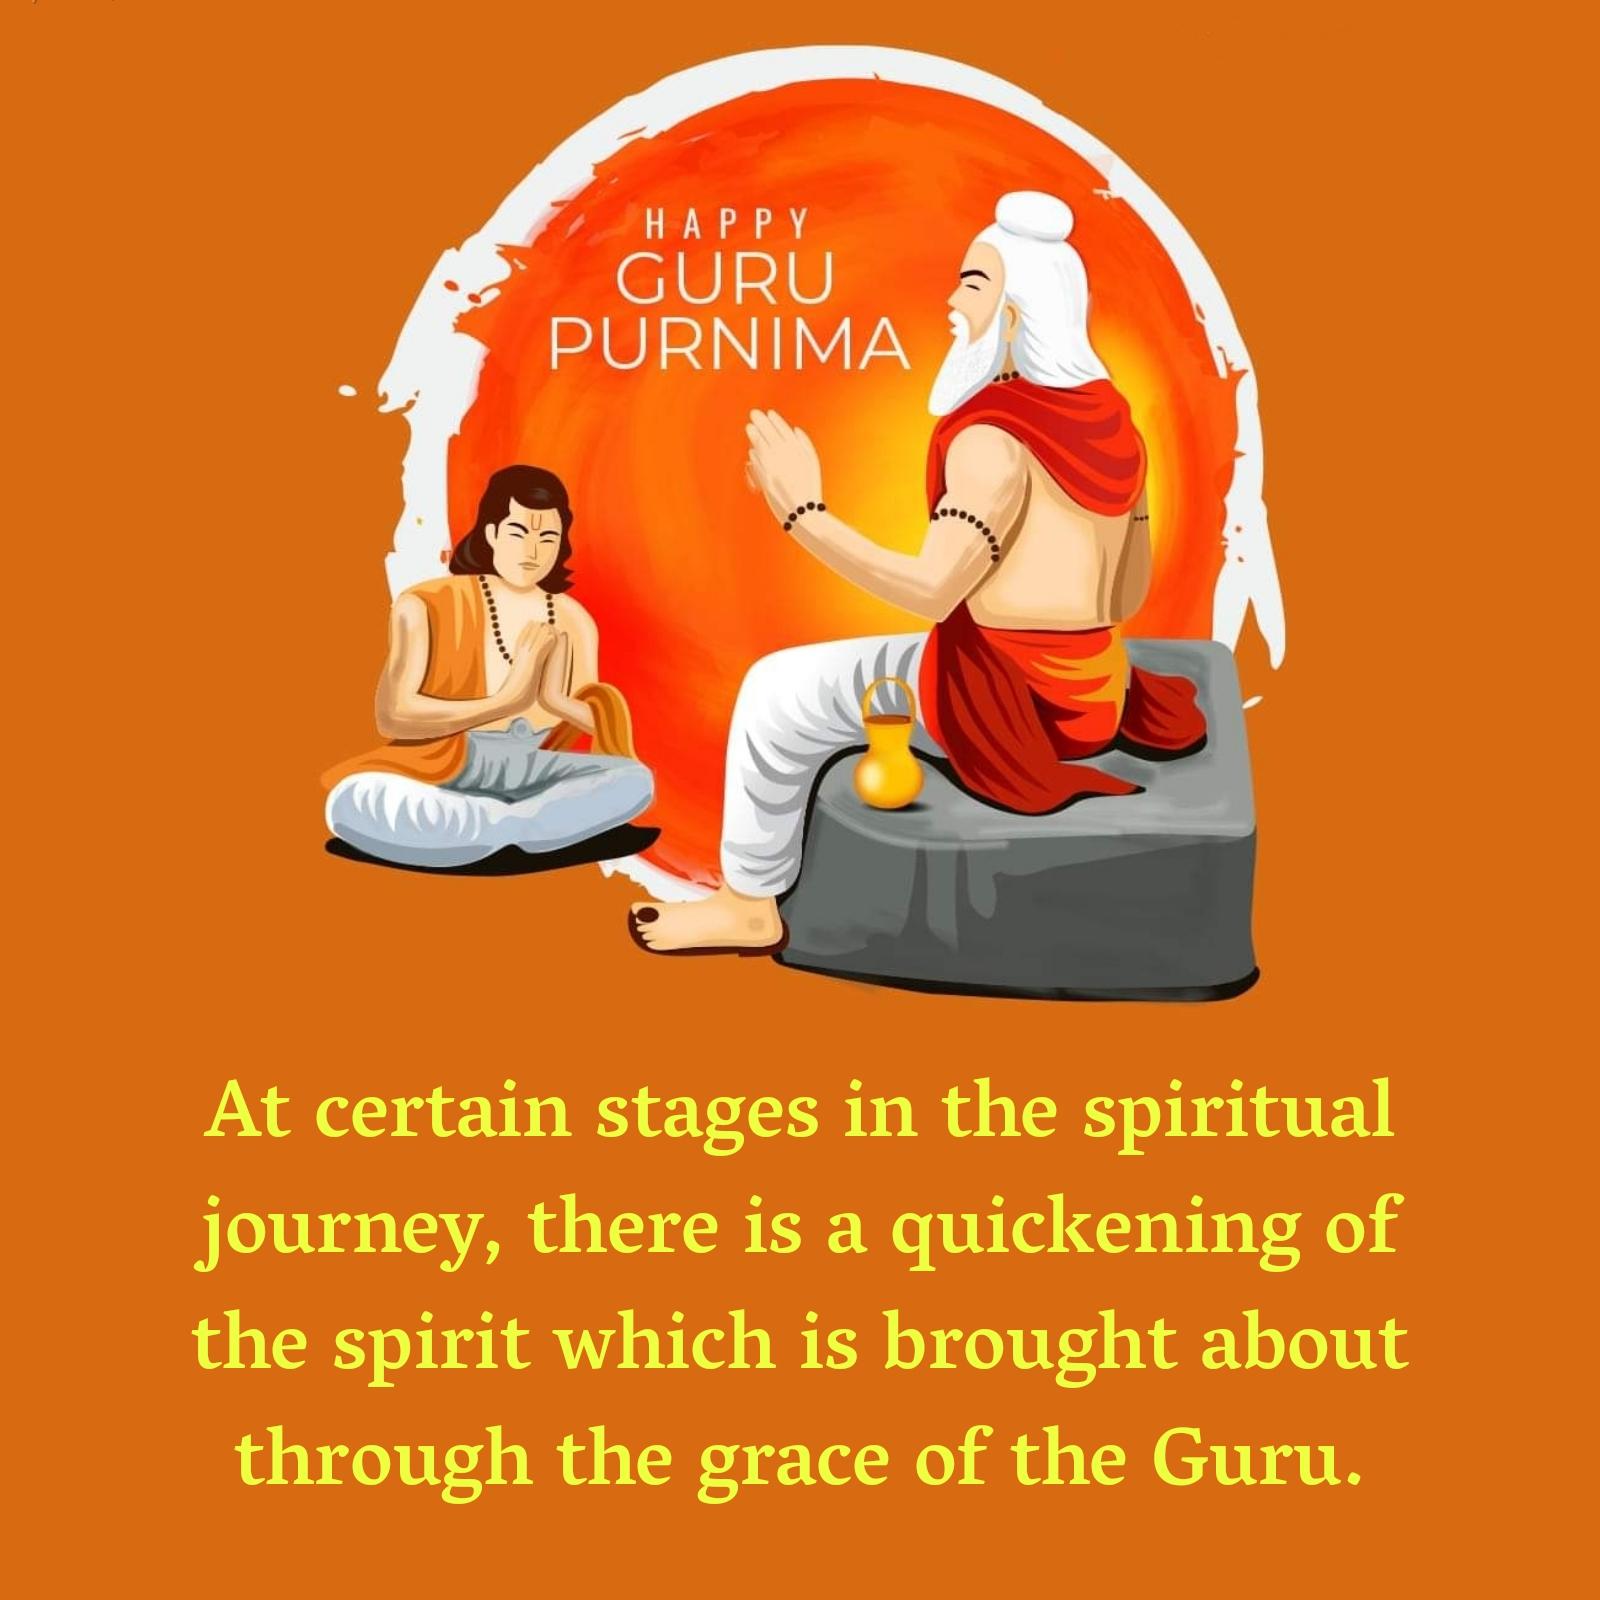 At certain stages in the spiritual journey there is a quickening of the spirit